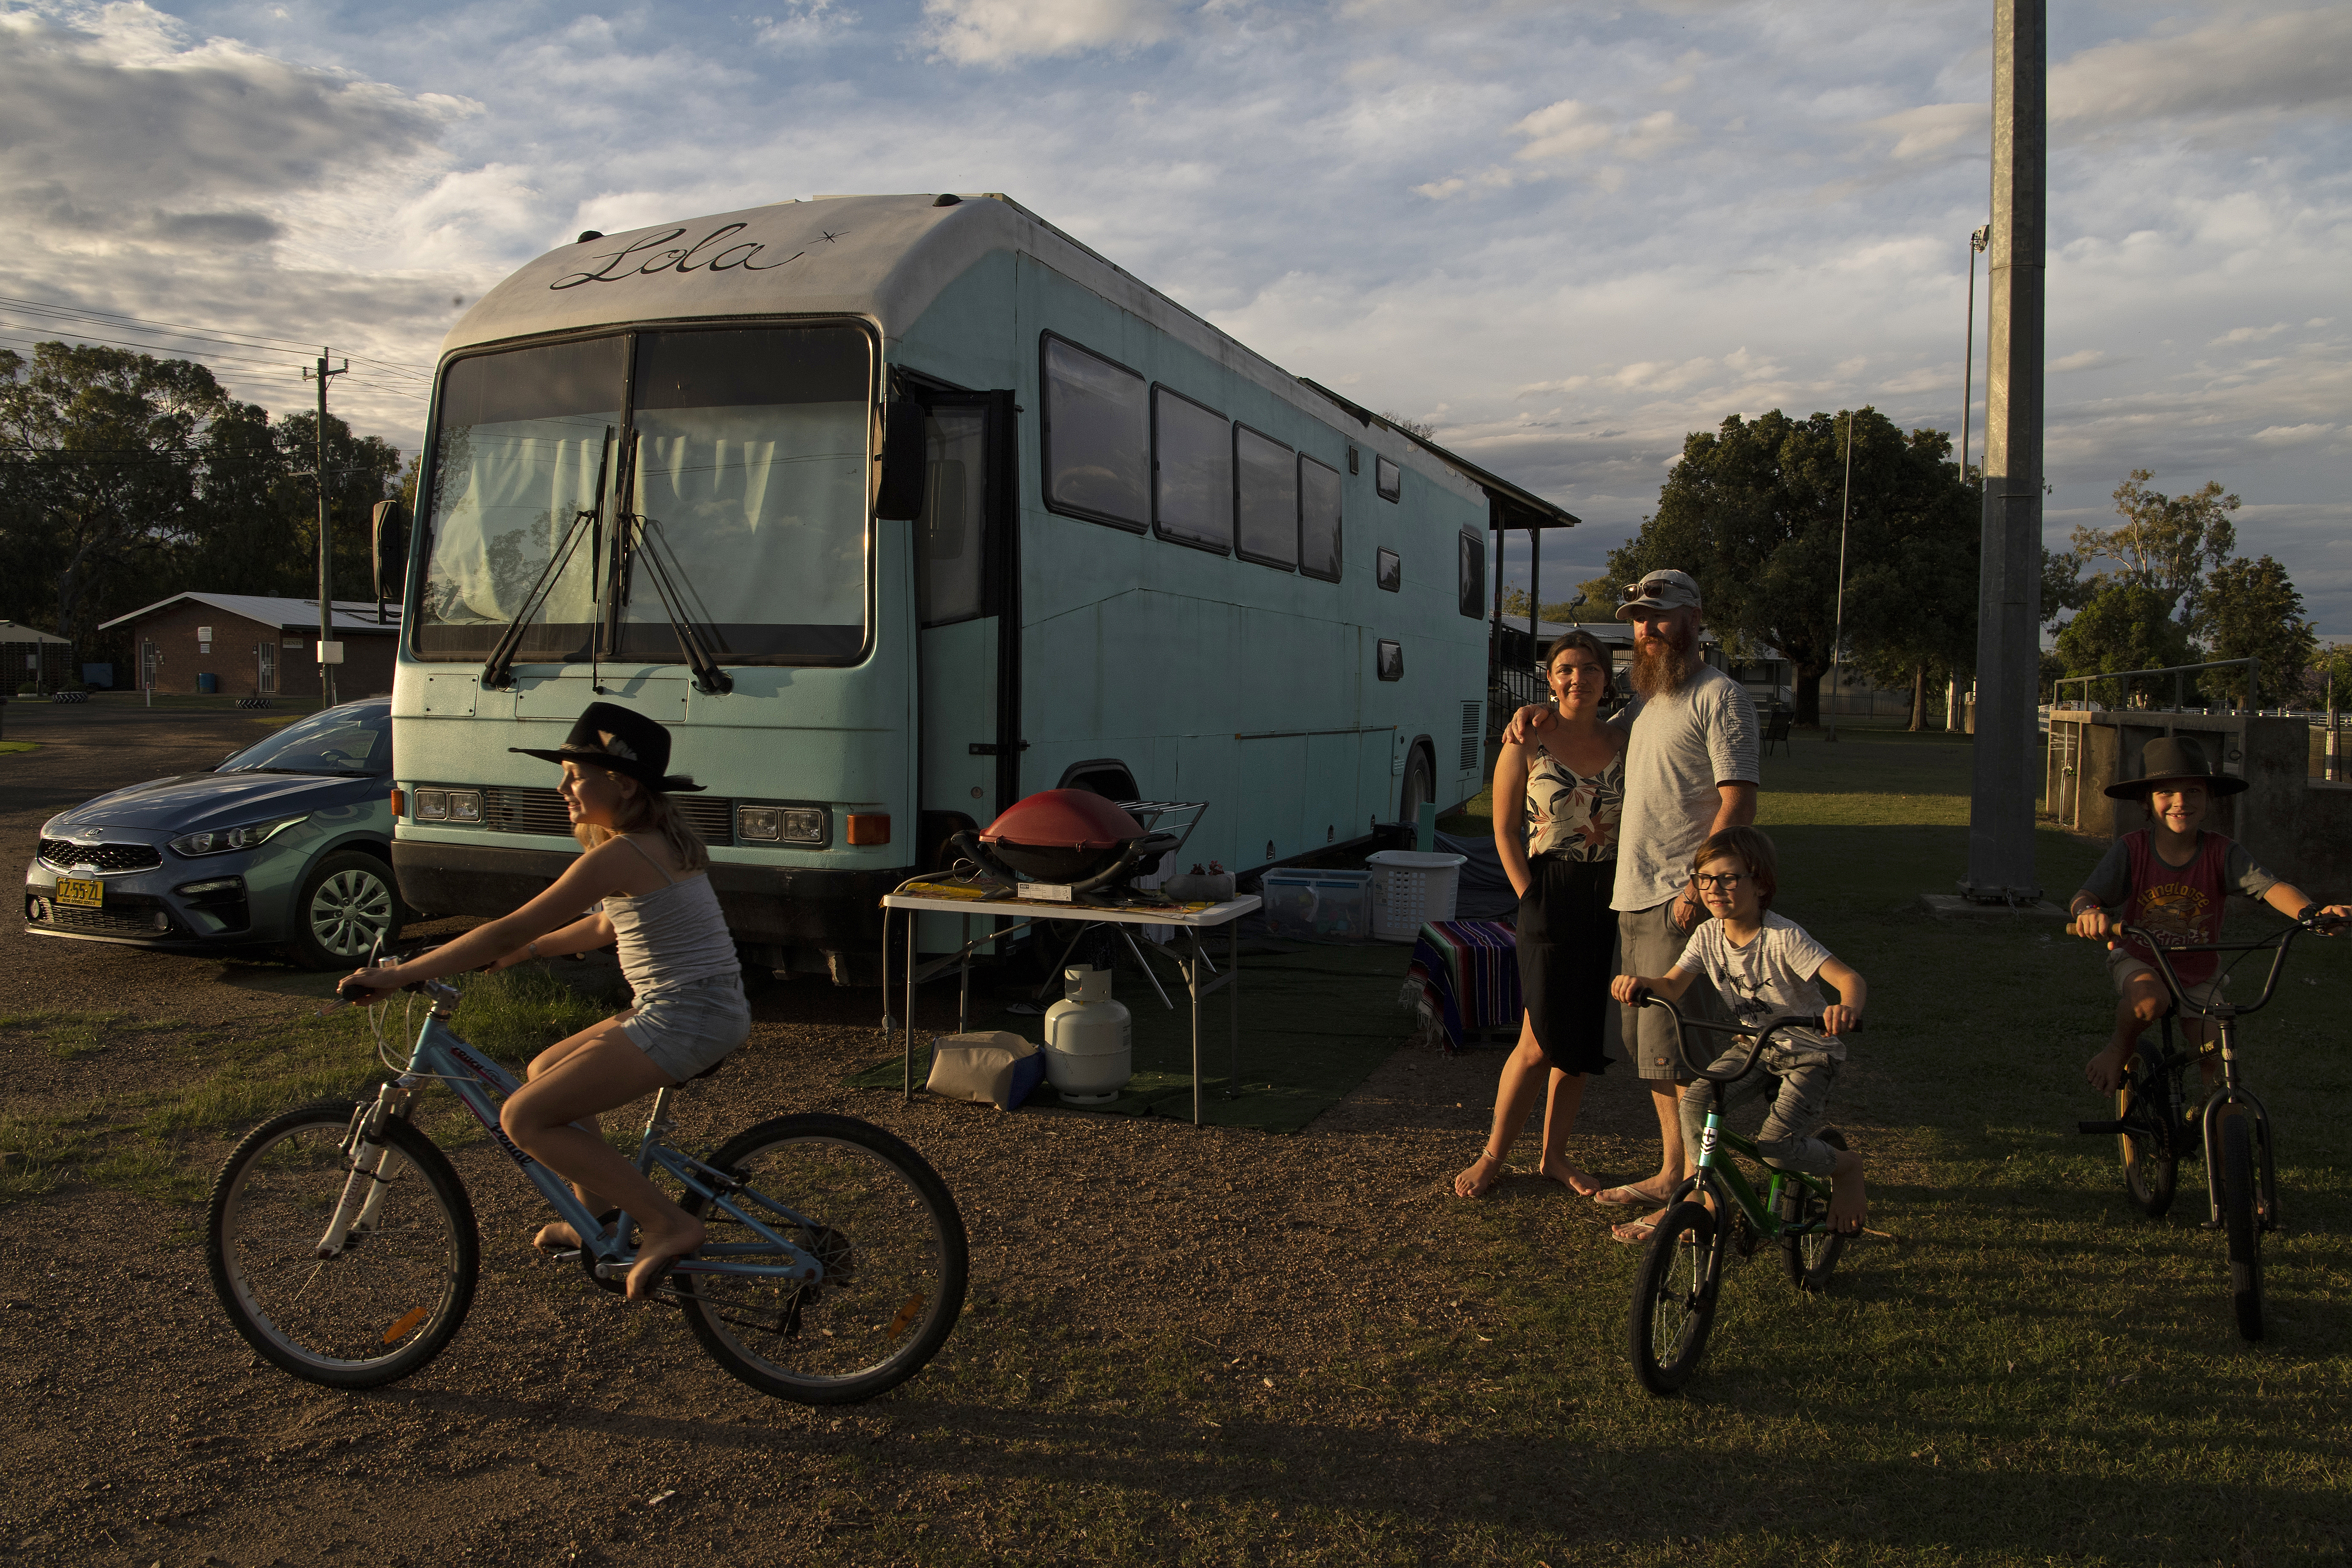 Jason and Sarah Cielo with their children Stella, Rome and Rocco had been living in their bus at Moree showground for three months. Photo by Louise Kennerley